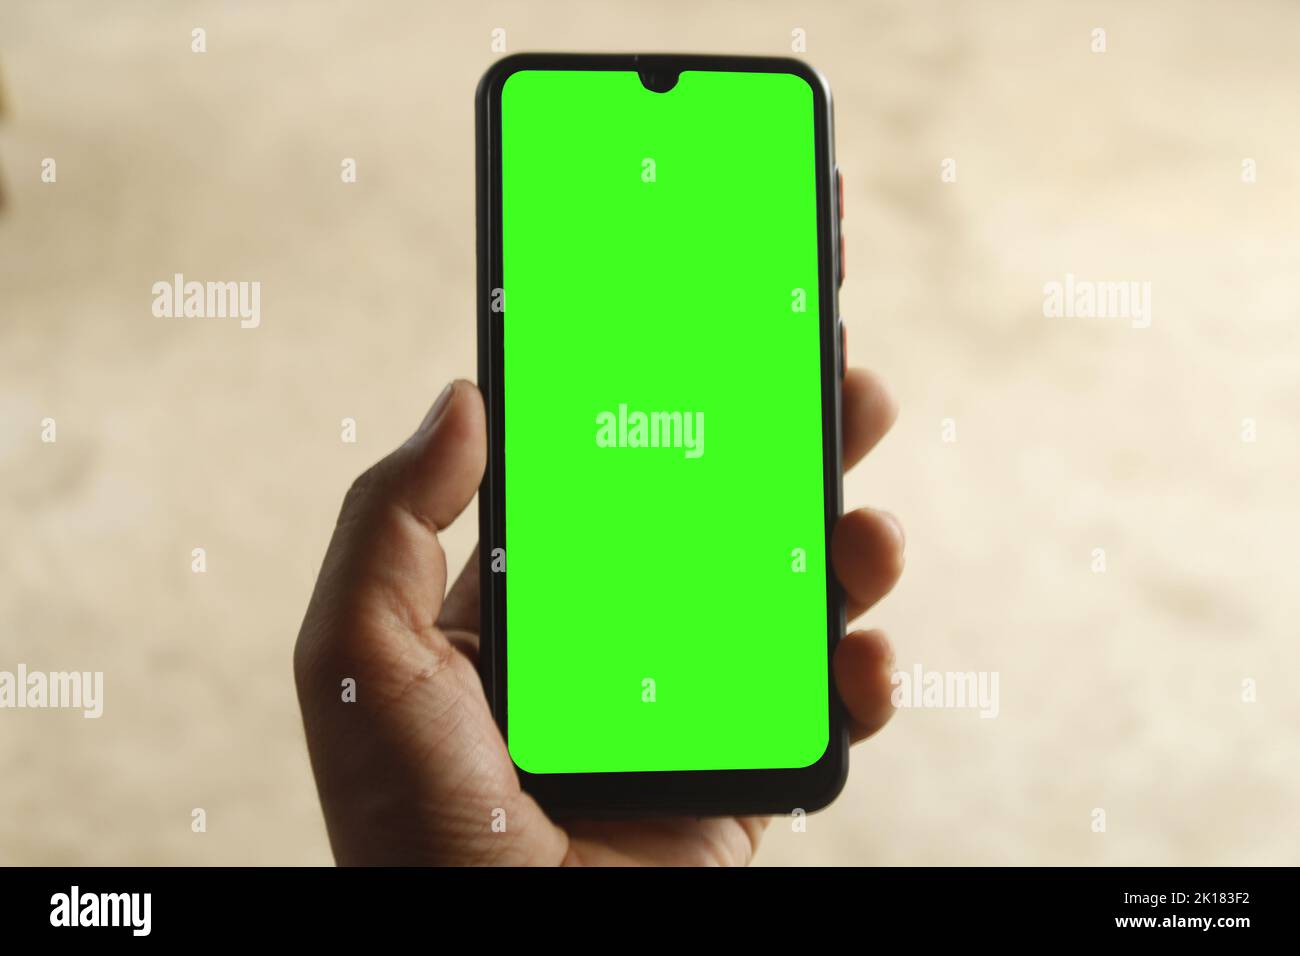 A guy is catching a phone , Phone green screen , man using a phone green screen Stock Photo